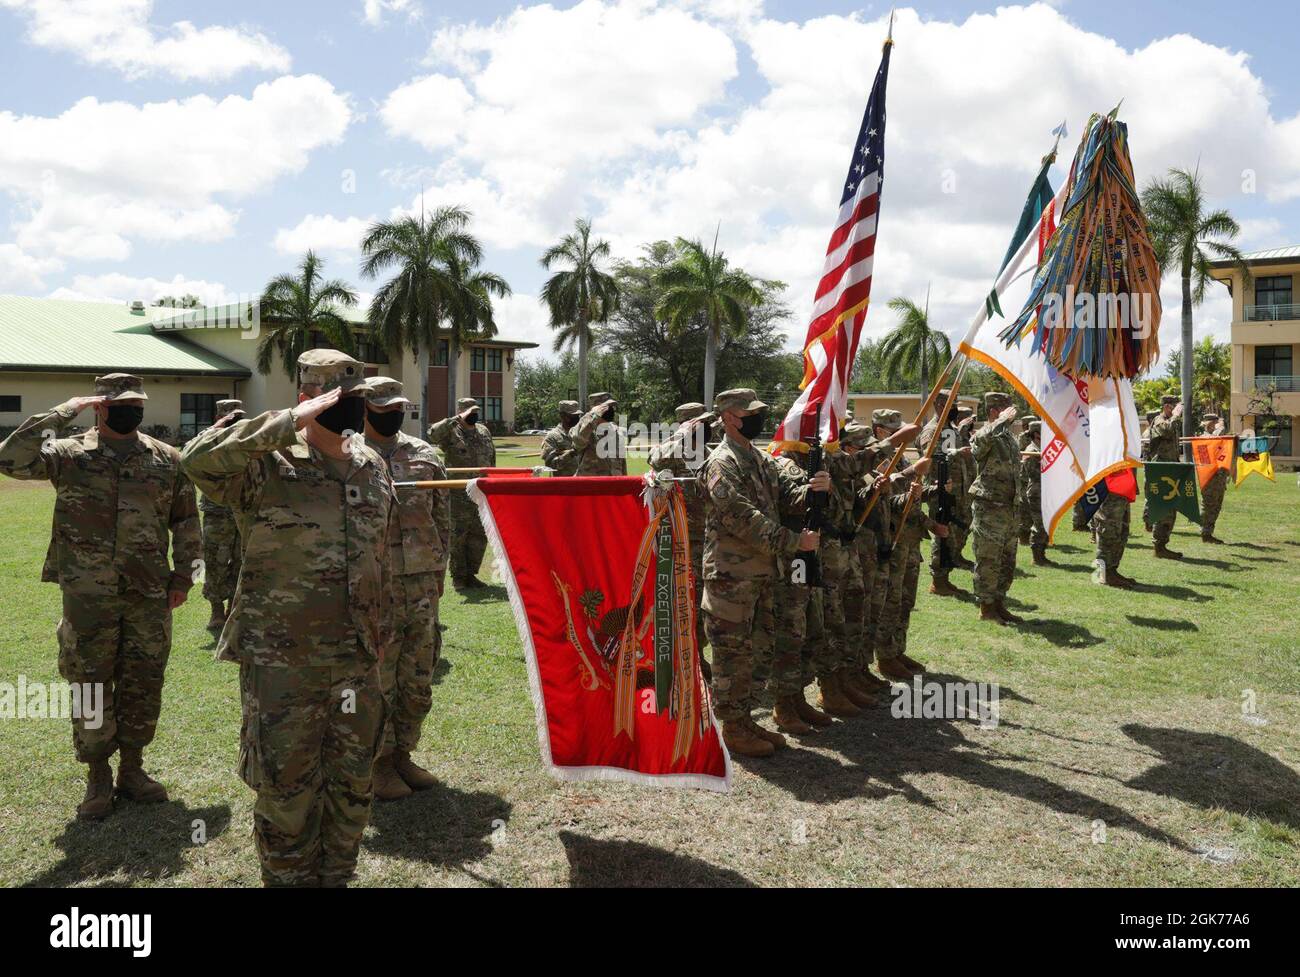 U.S. Army Reserve soldiers from the 303rd Maneuver Enhancement Brigade present arms on August 22 2021, at Fort Shafter Flats in Honolulu.  The 303rd MEB provides Mission Command for Maneuver Support elements in order to ensure freedom of action, mobility, protection and sustainability to supported forces within our assigned area of responsibility. Stock Photo